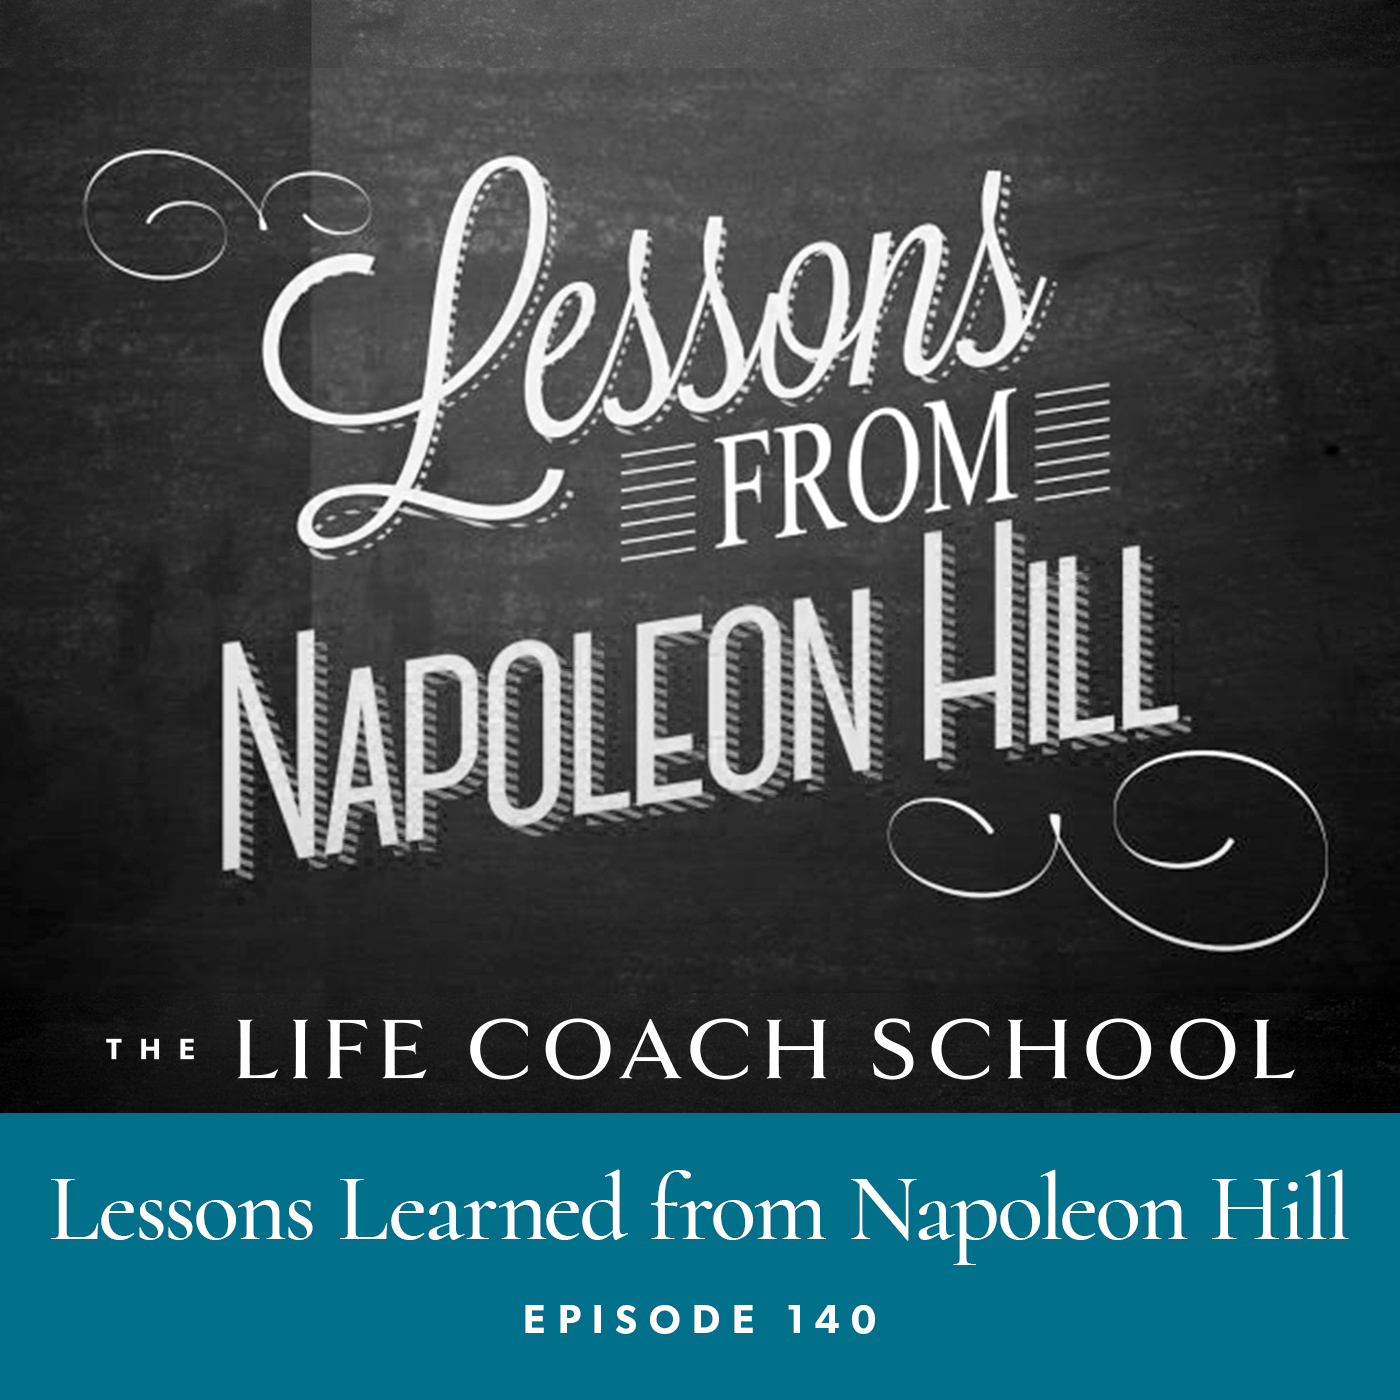 The Life Coach School Podcast with Brooke Castillo | Episode 140 | Lessons Learned from Napoleon Hill